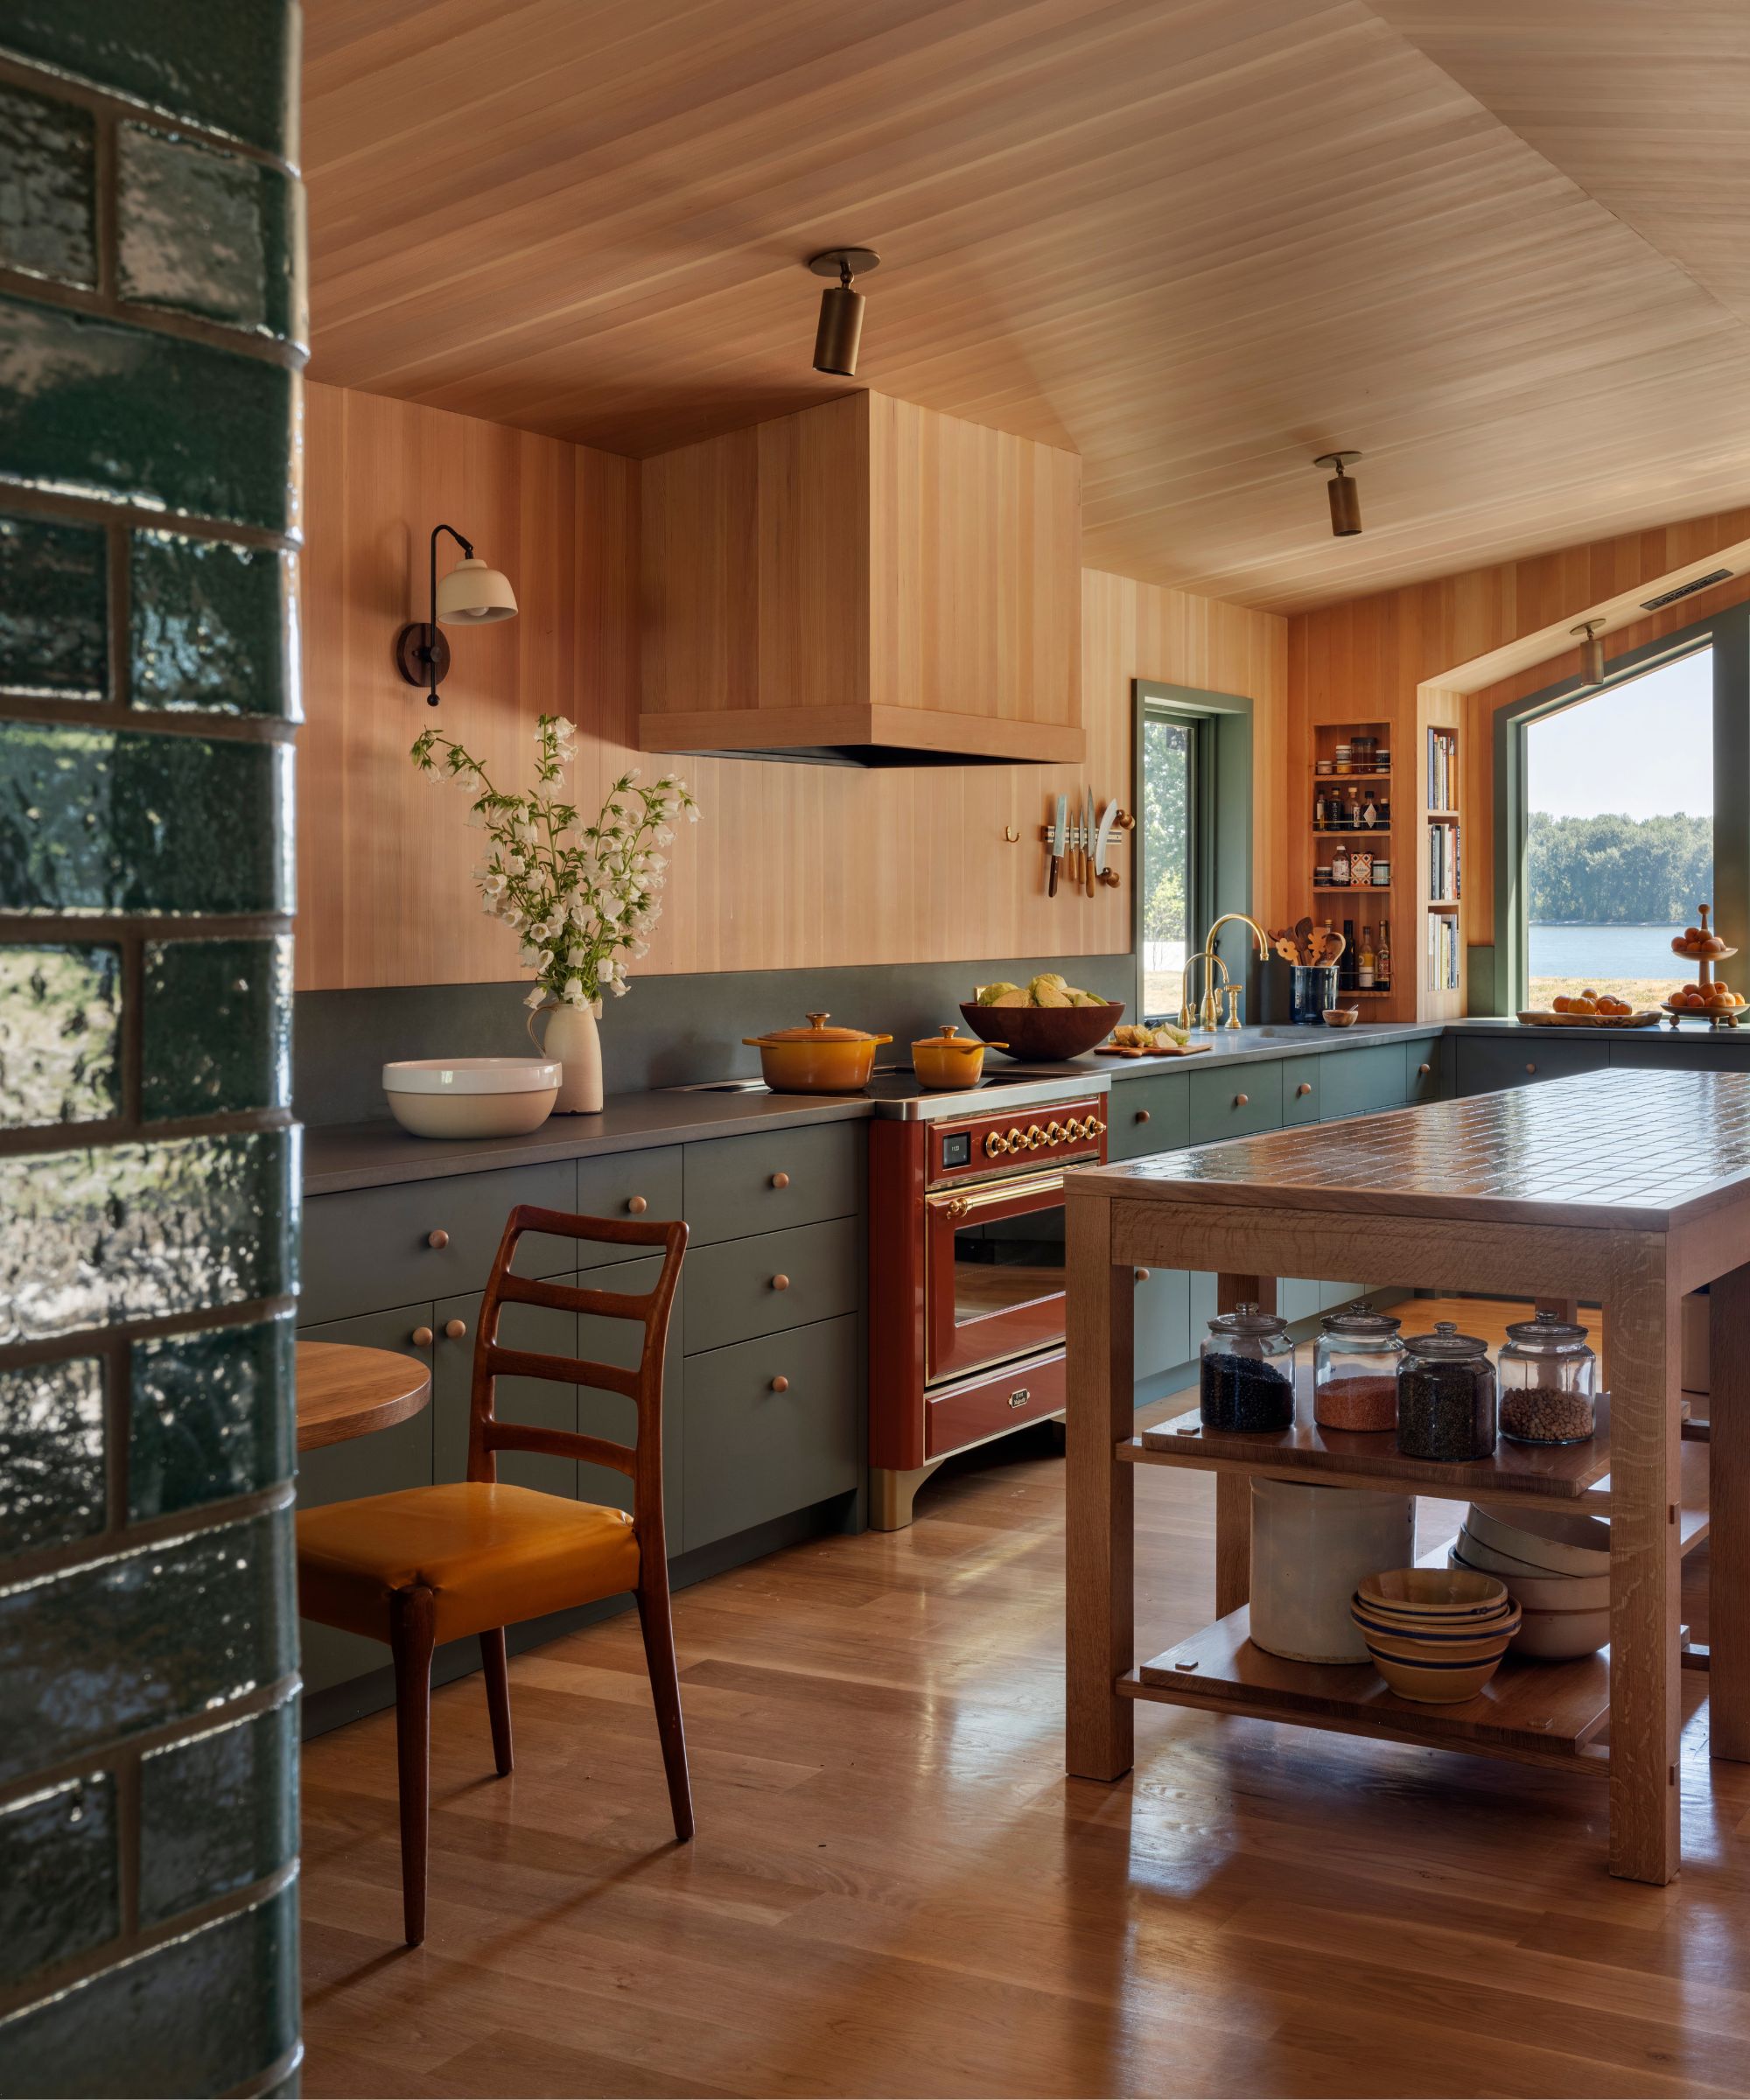 wood clad kitchen with green cabinetry and a red stove